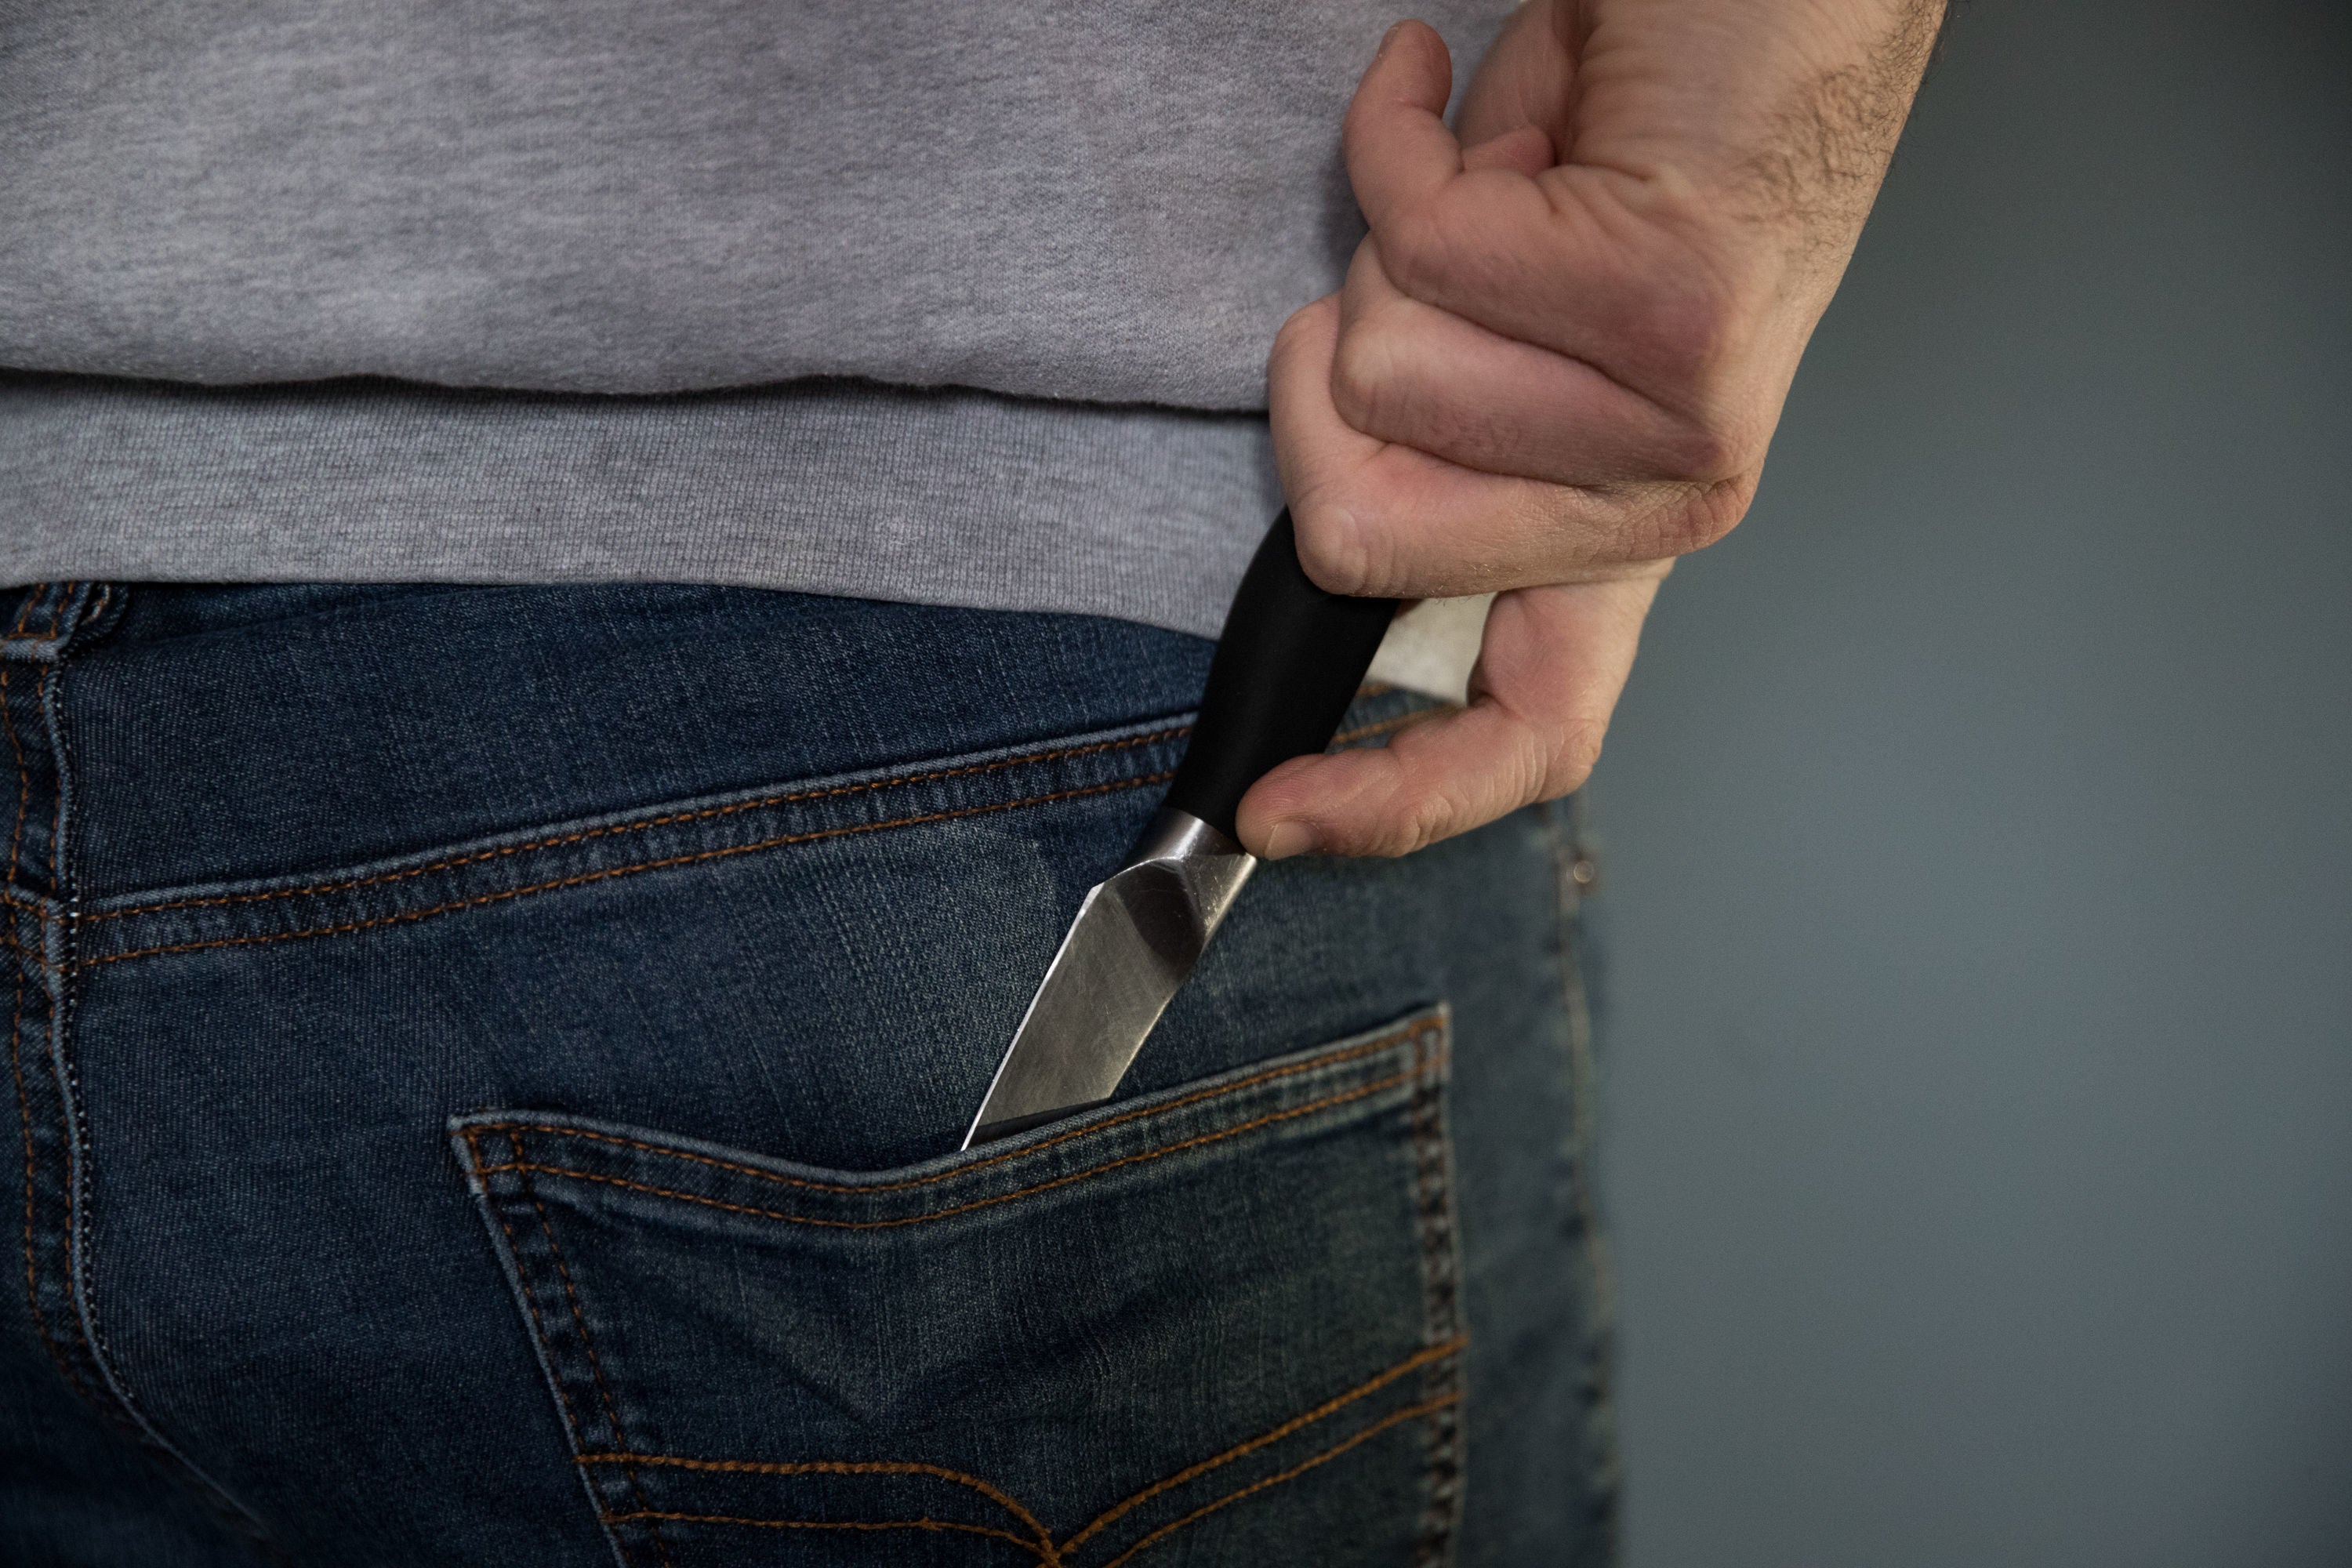 The trial aimed to stop people as young as 12 from carrying knives